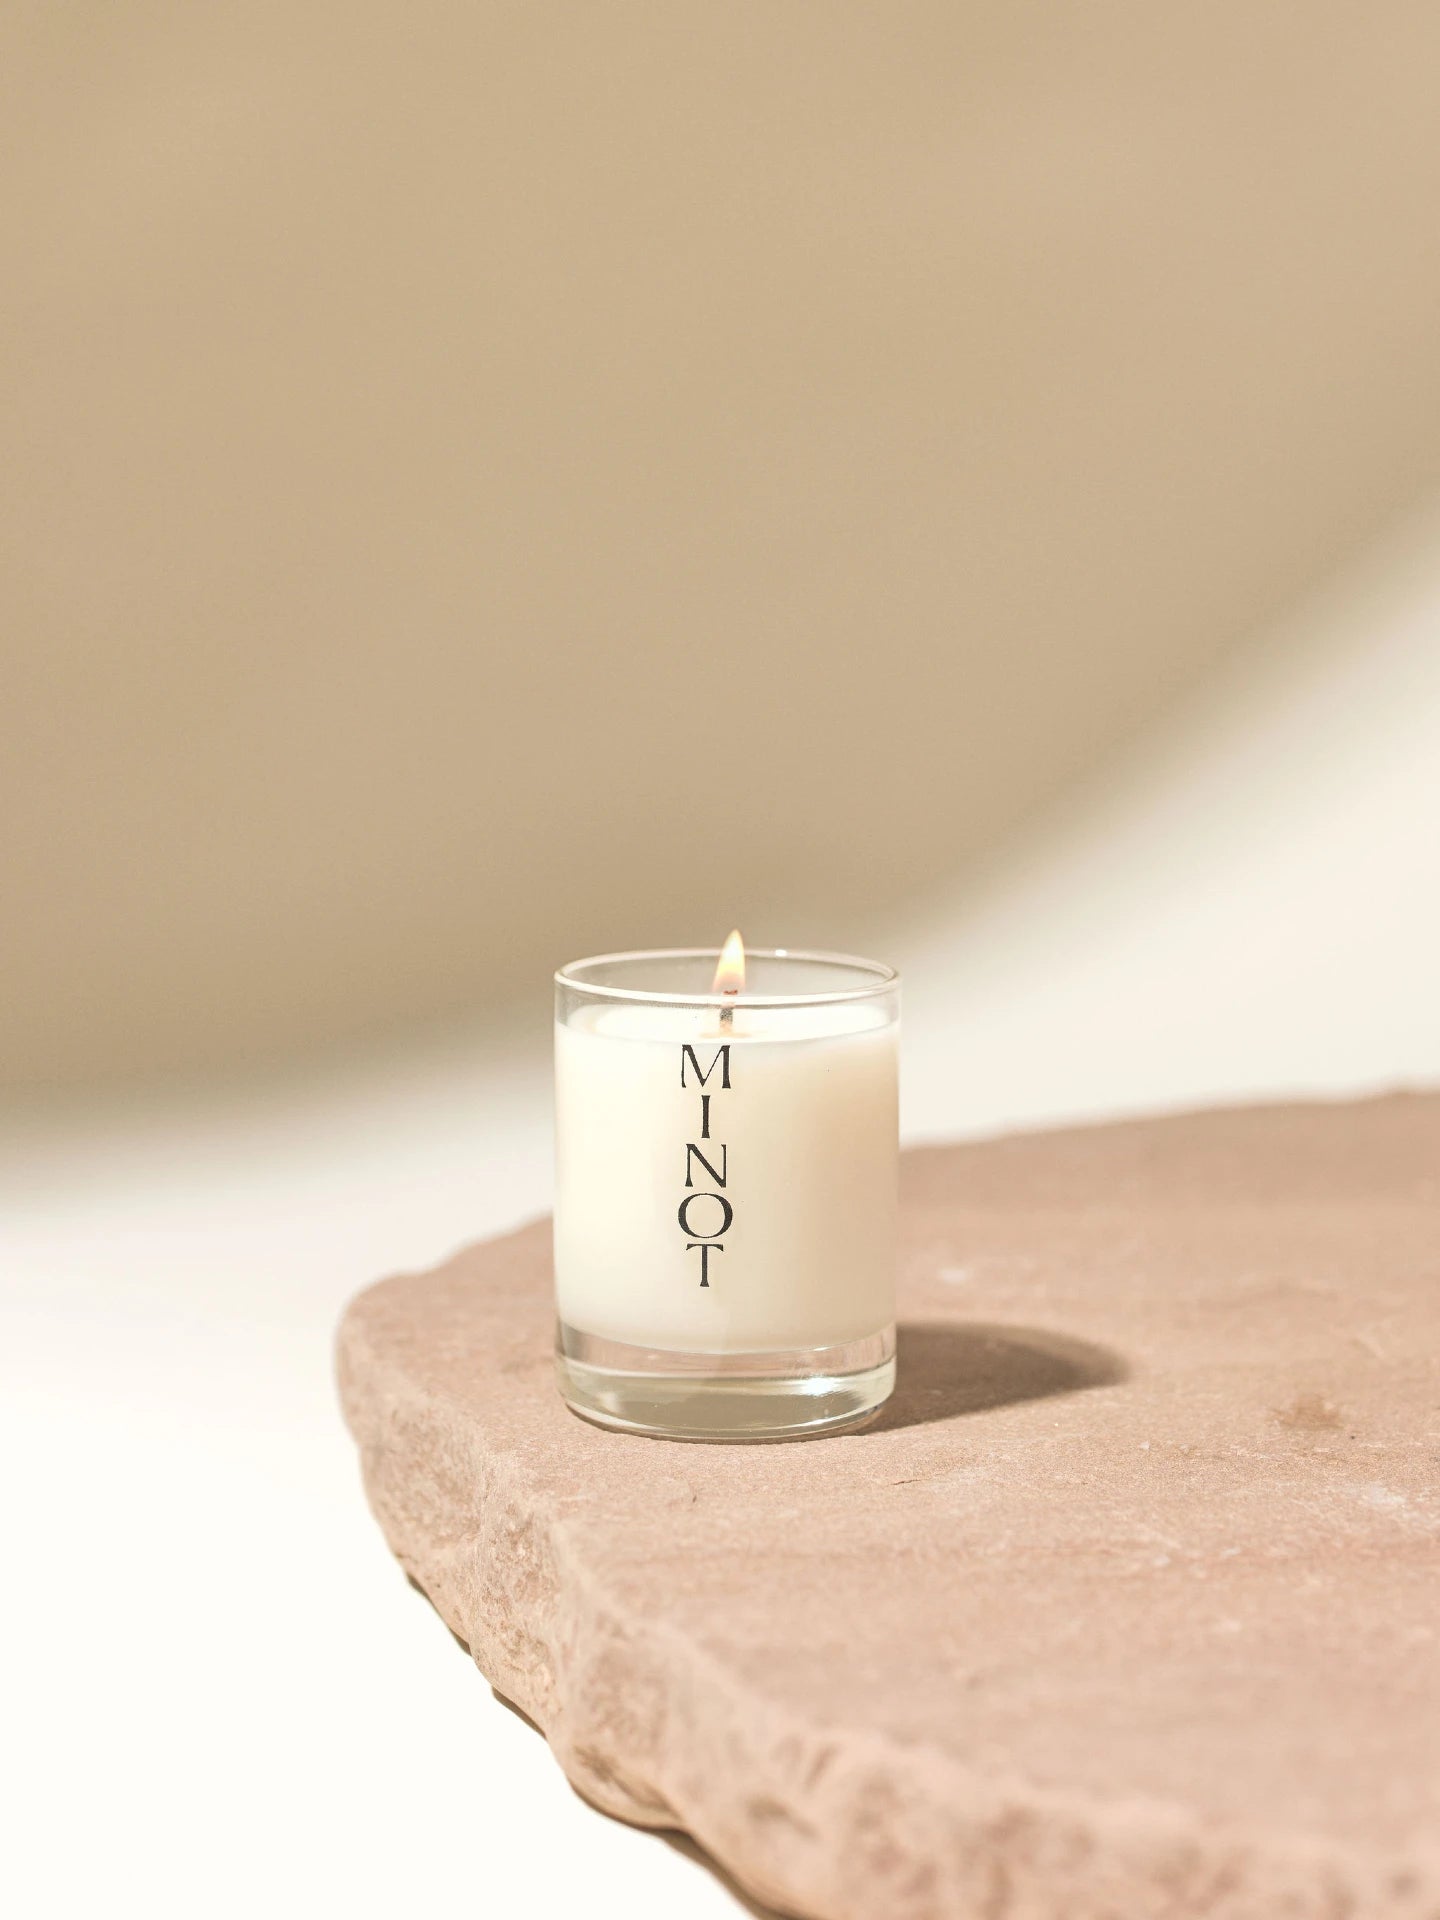 The Dusk Mini soy candle is a clean-burning blend of patchouli, lemongrass, lime, and black currant